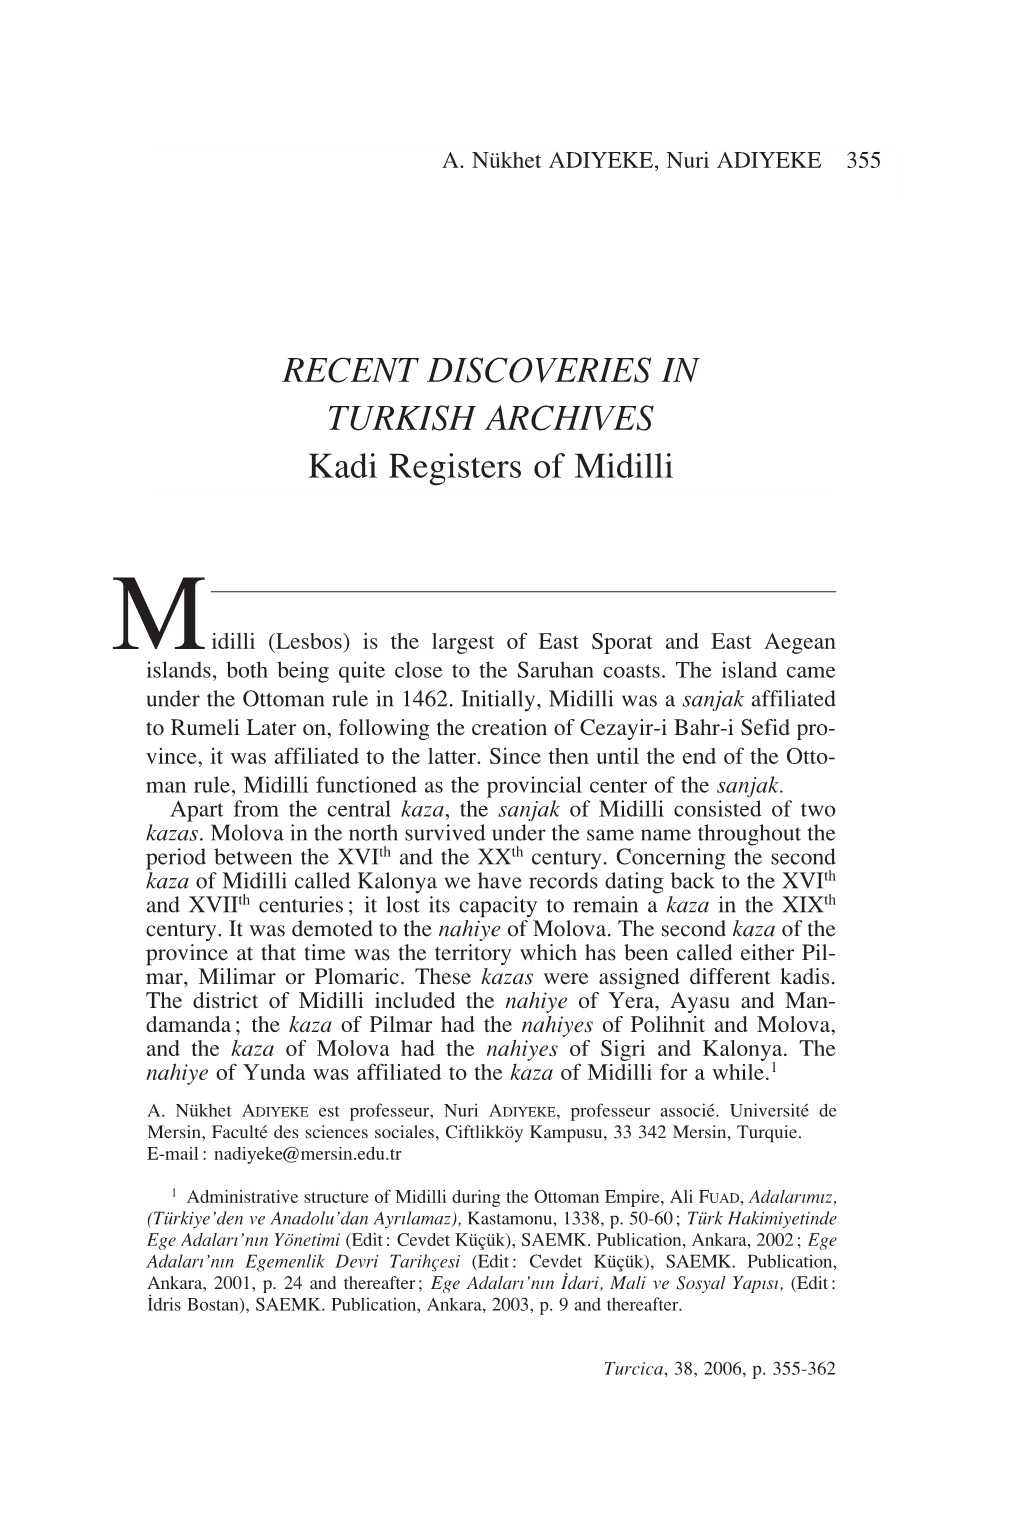 RECENT DISCOVERIES in TURKISH ARCHIVES Kadi Registers of Midilli